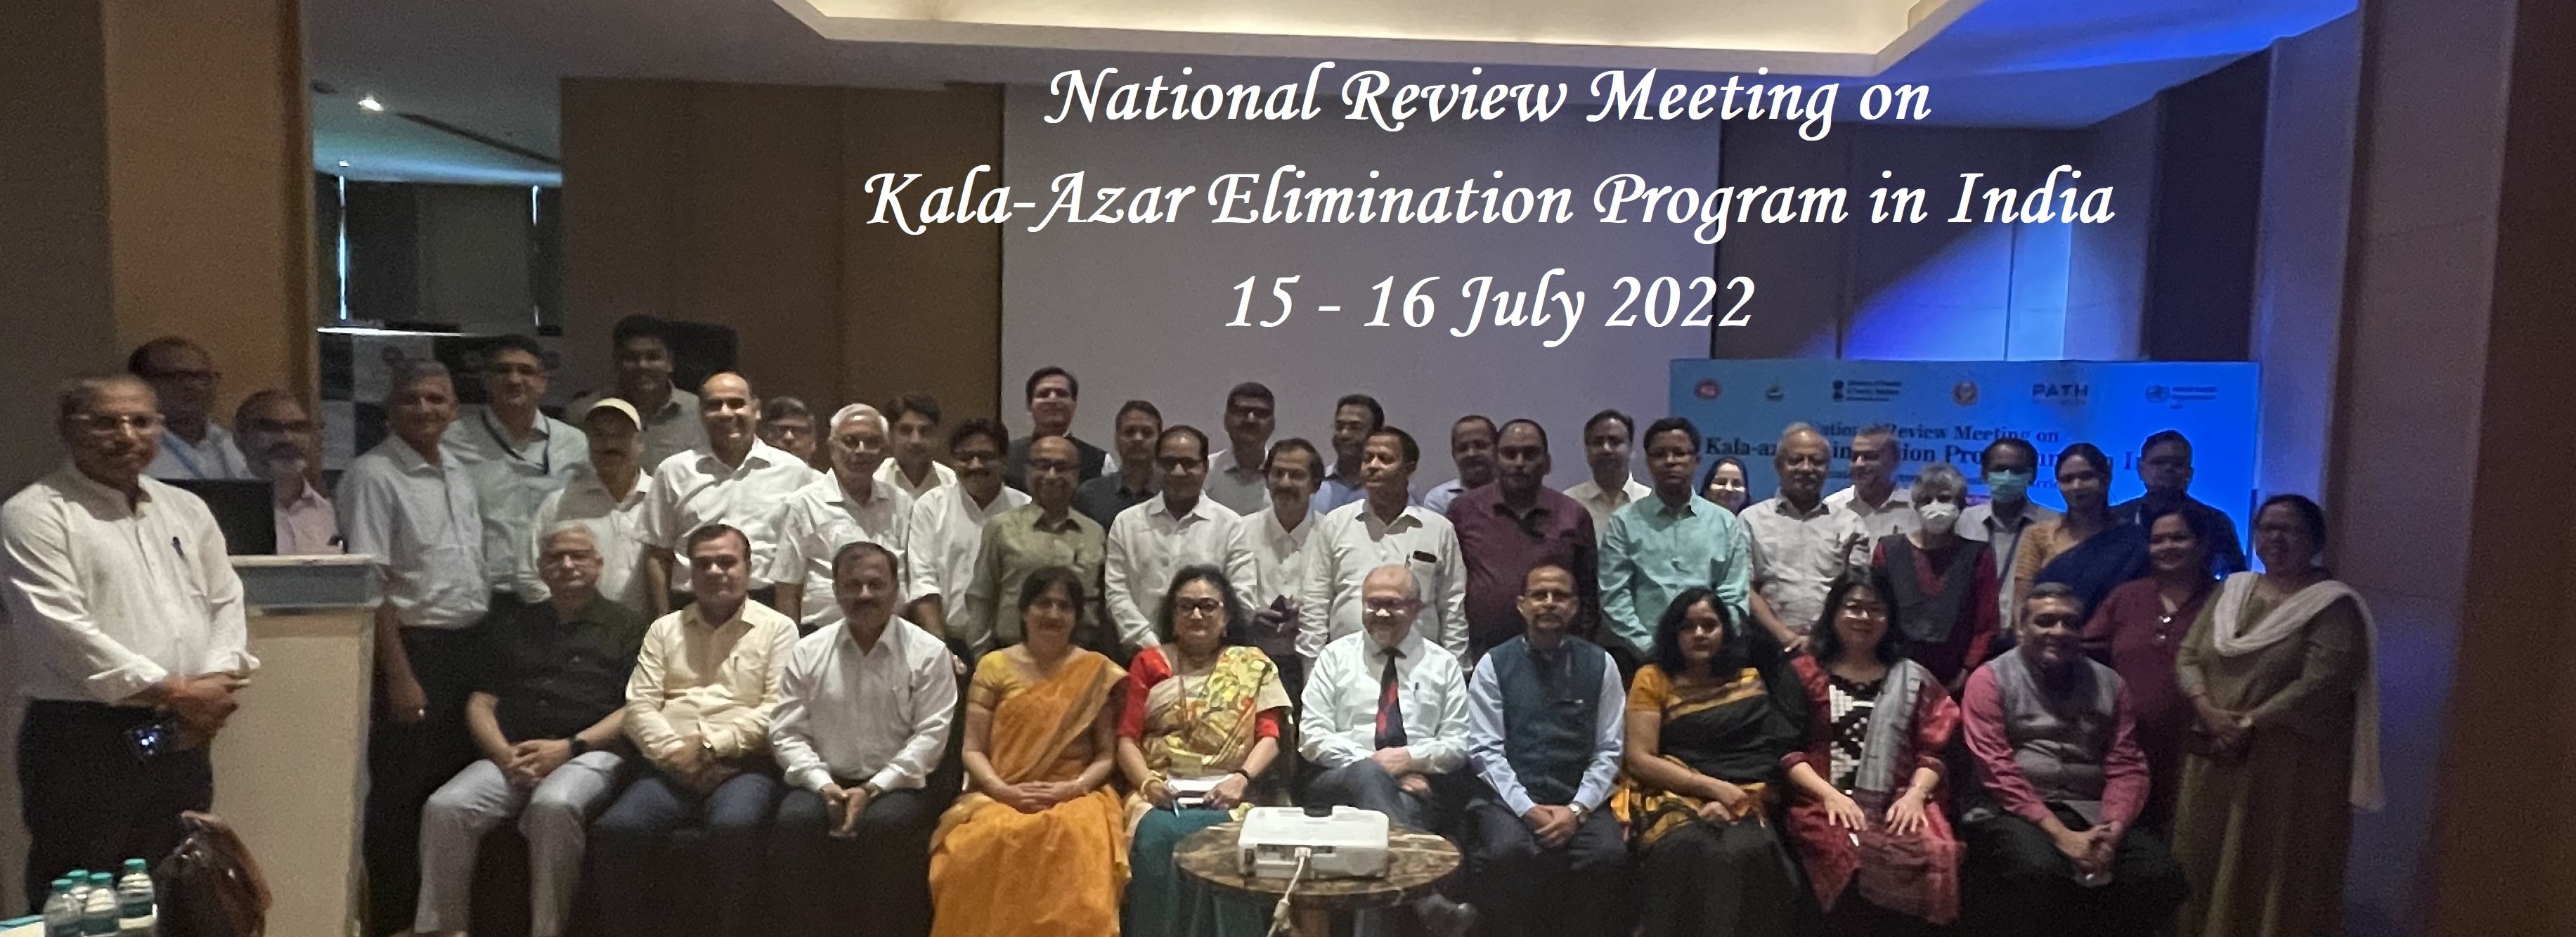 National Kala-azar review meeting held in Lucknow from 15-16 July 2022 attended by DGHS, Joint Secretary, Director (NCVBDC), SPOs, Sr.RDs of all 4 Kala-azar Endemic States & Development partners(WHO,CARE India,  PATH, PCI, GHS,CFAR)